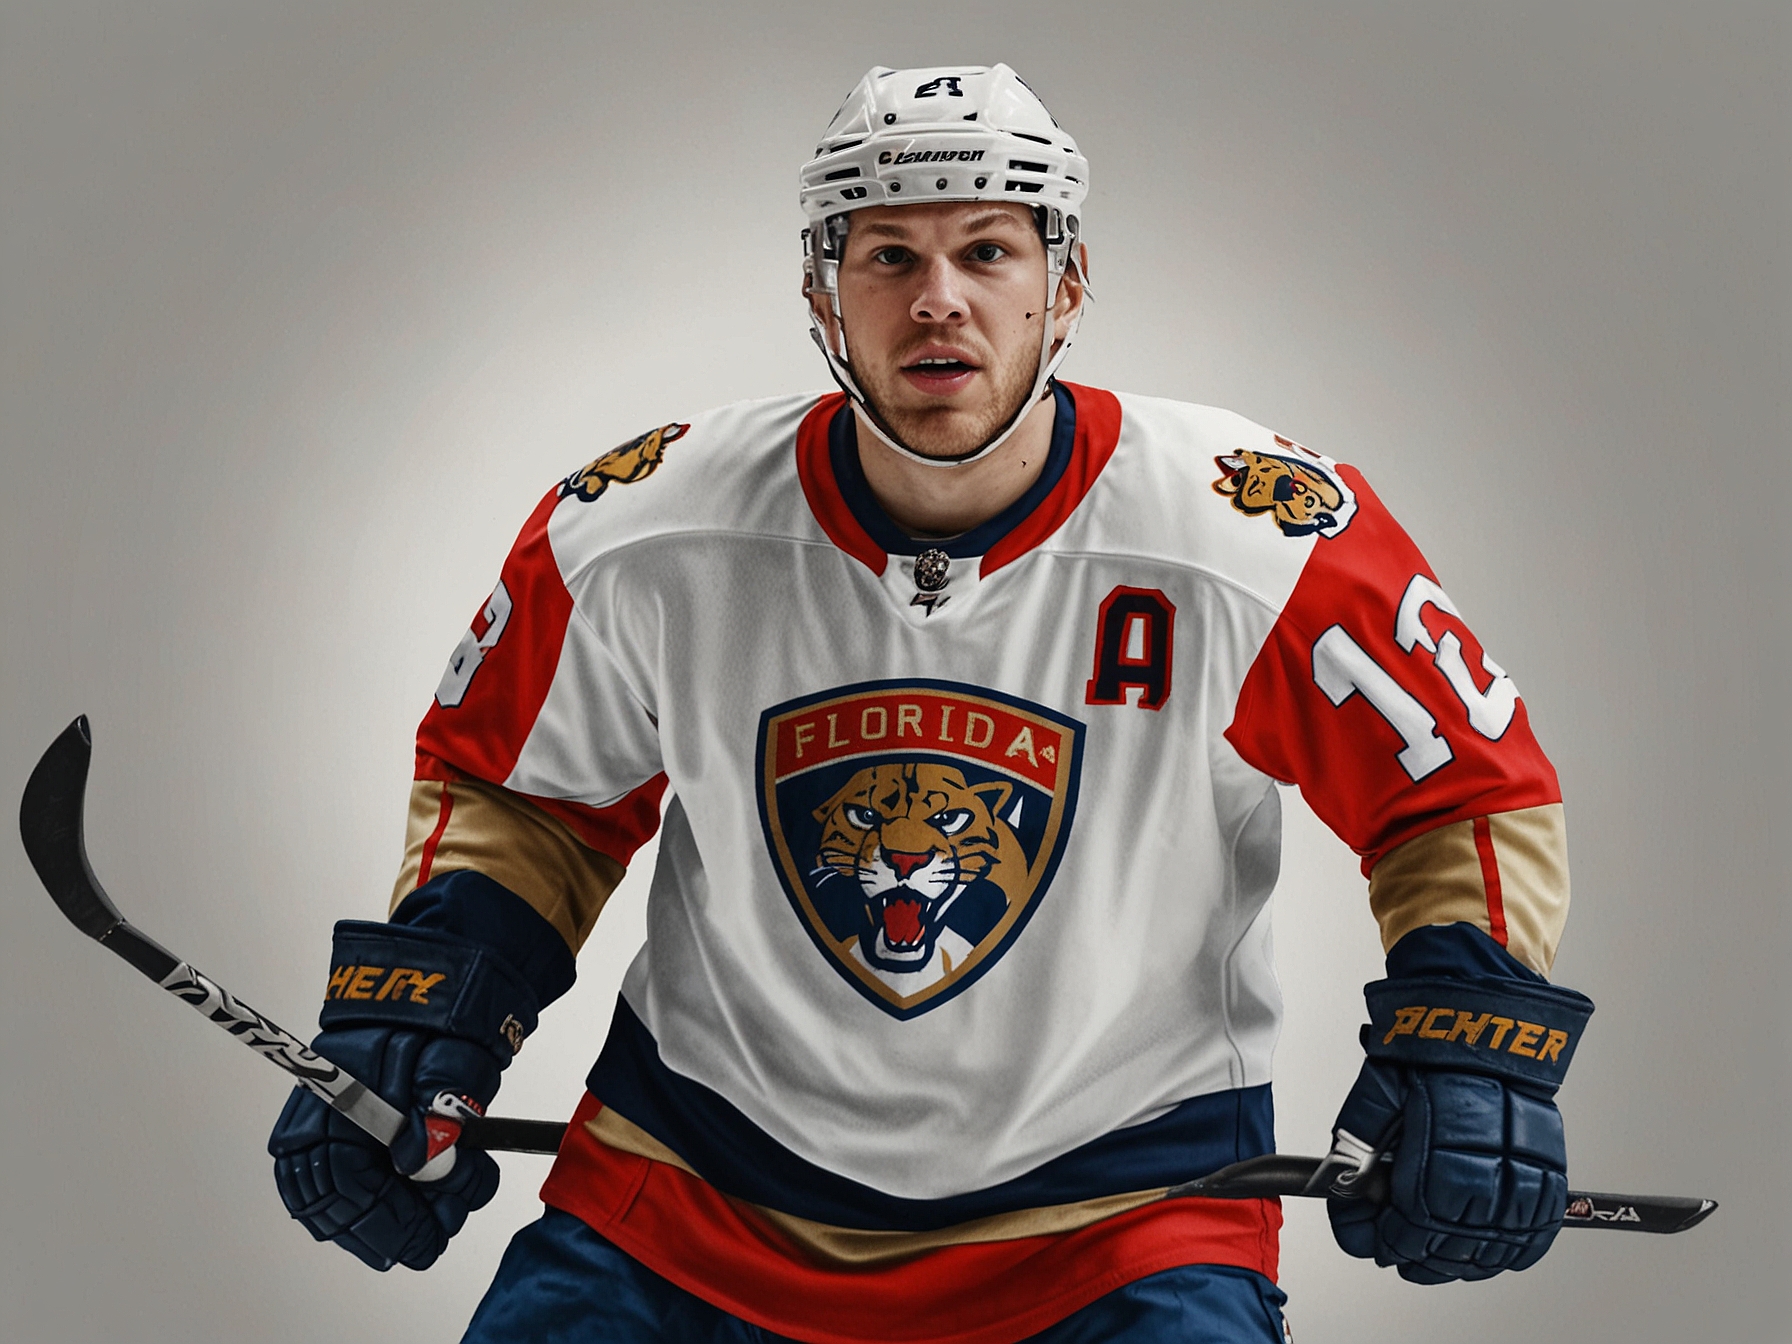 Florida Panthers' captain Aleksander Barkov in action, showcasing his leadership and scoring ability, both essential for the Panthers' success in the playoffs.